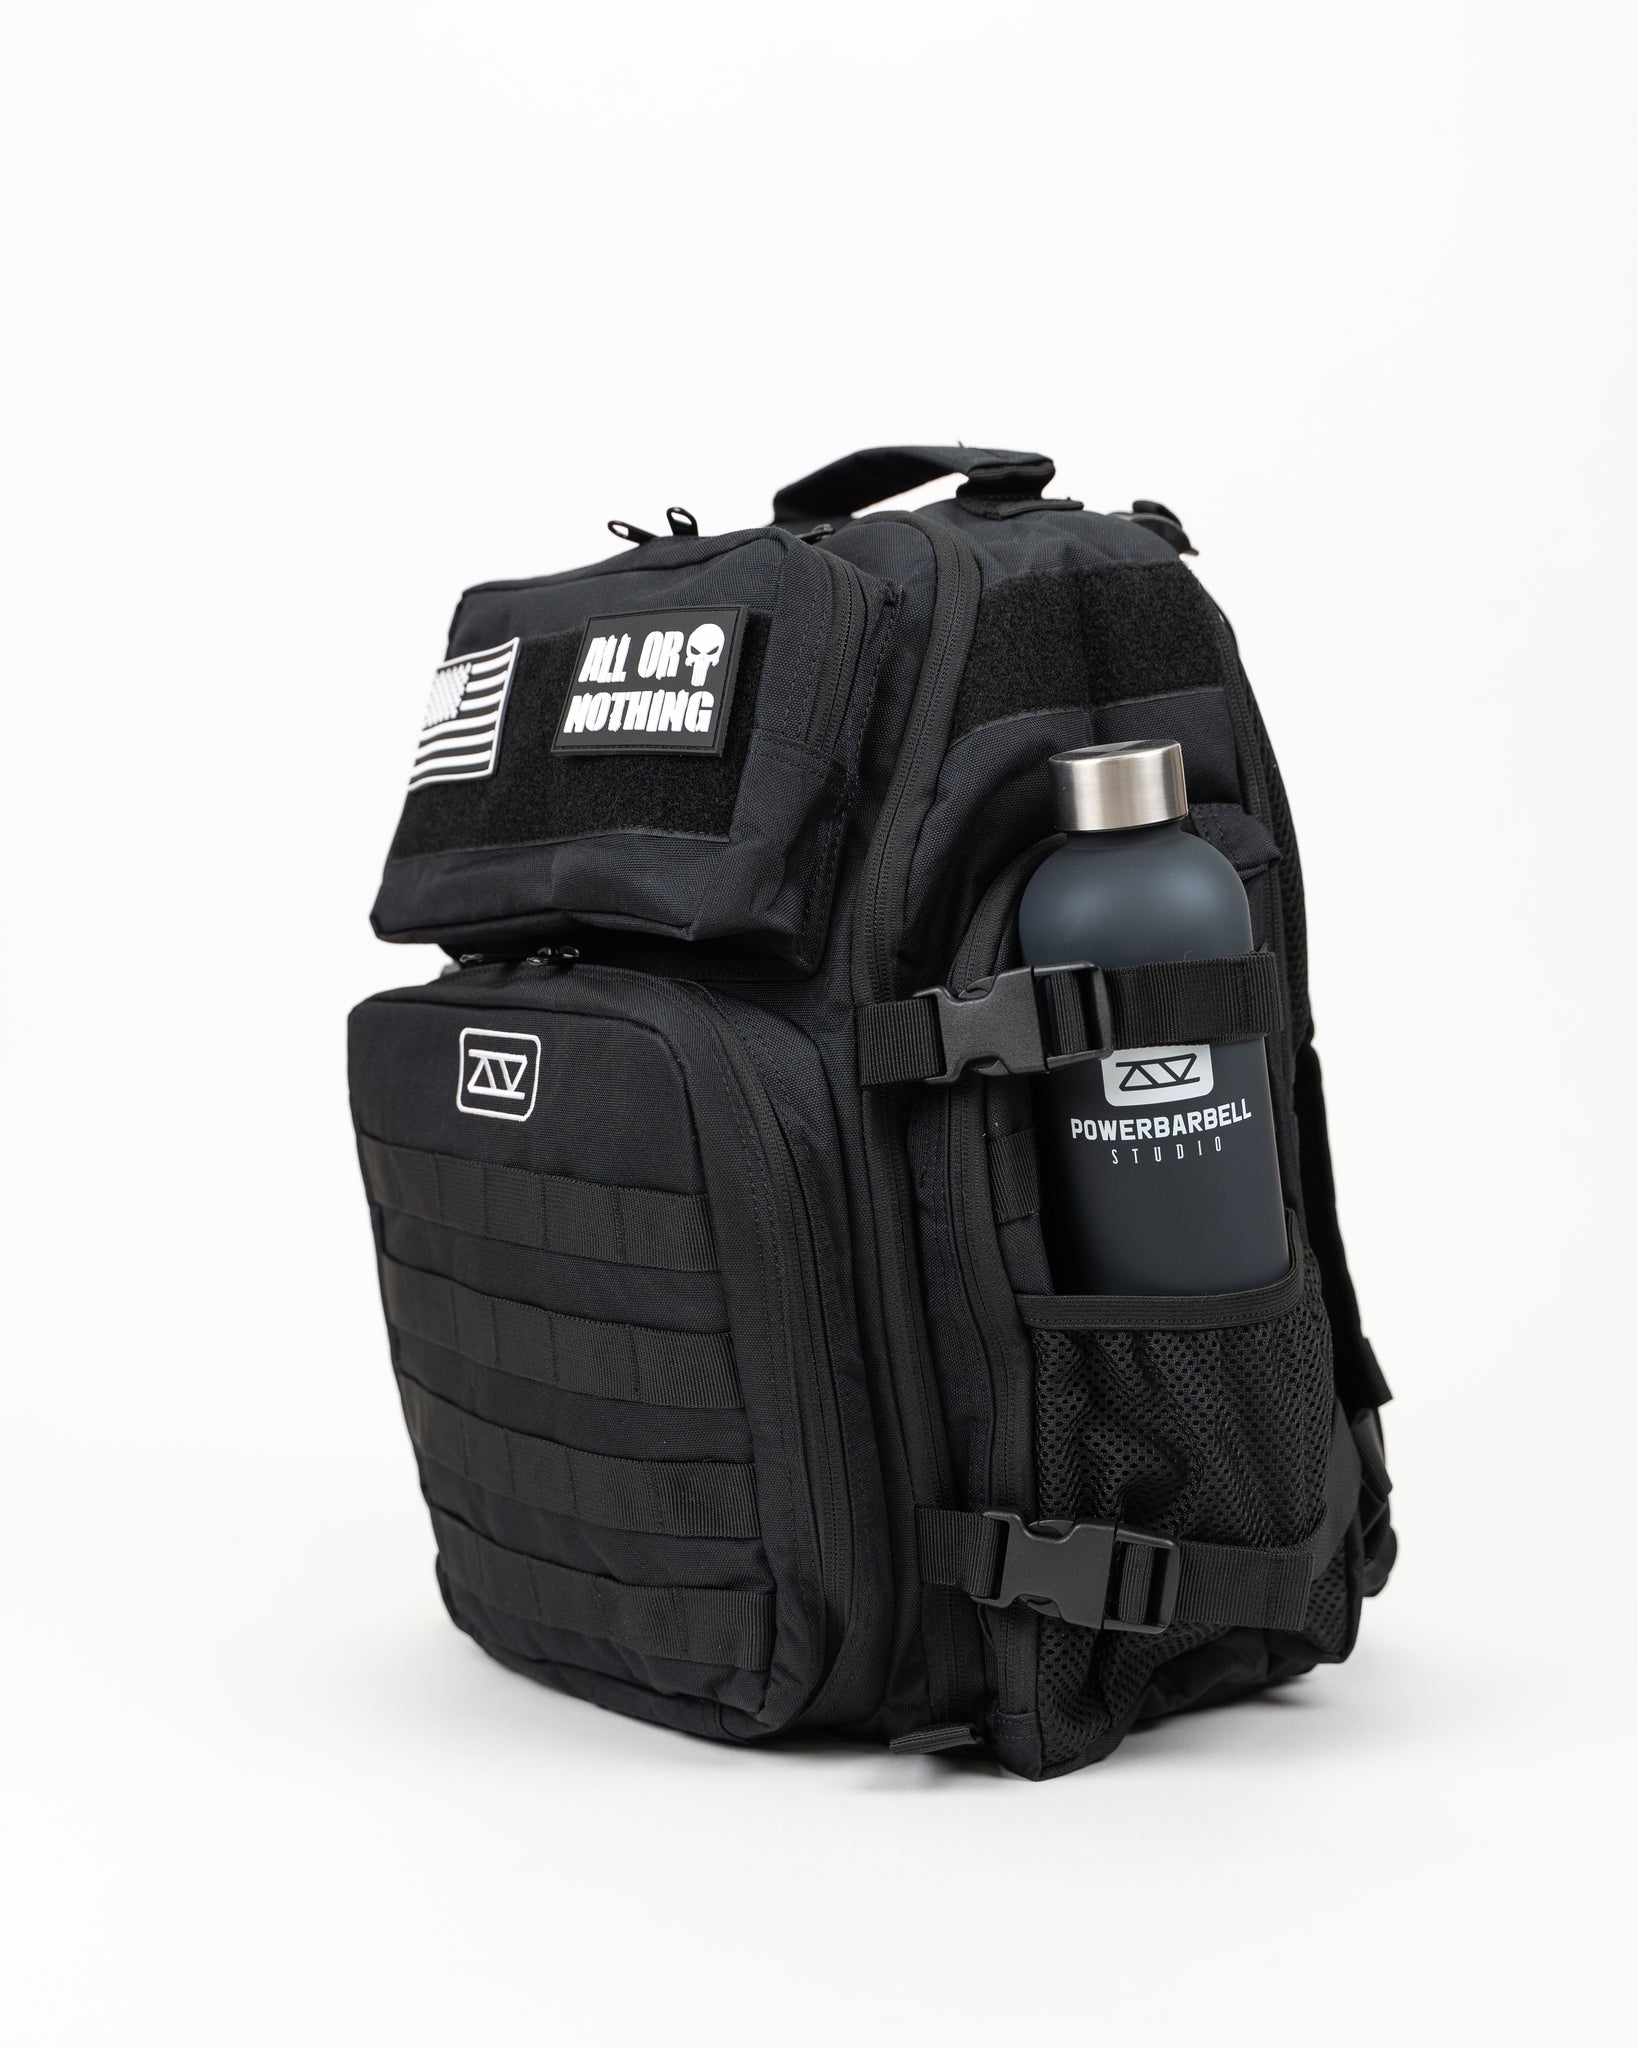 Tuppers backpack - PRO